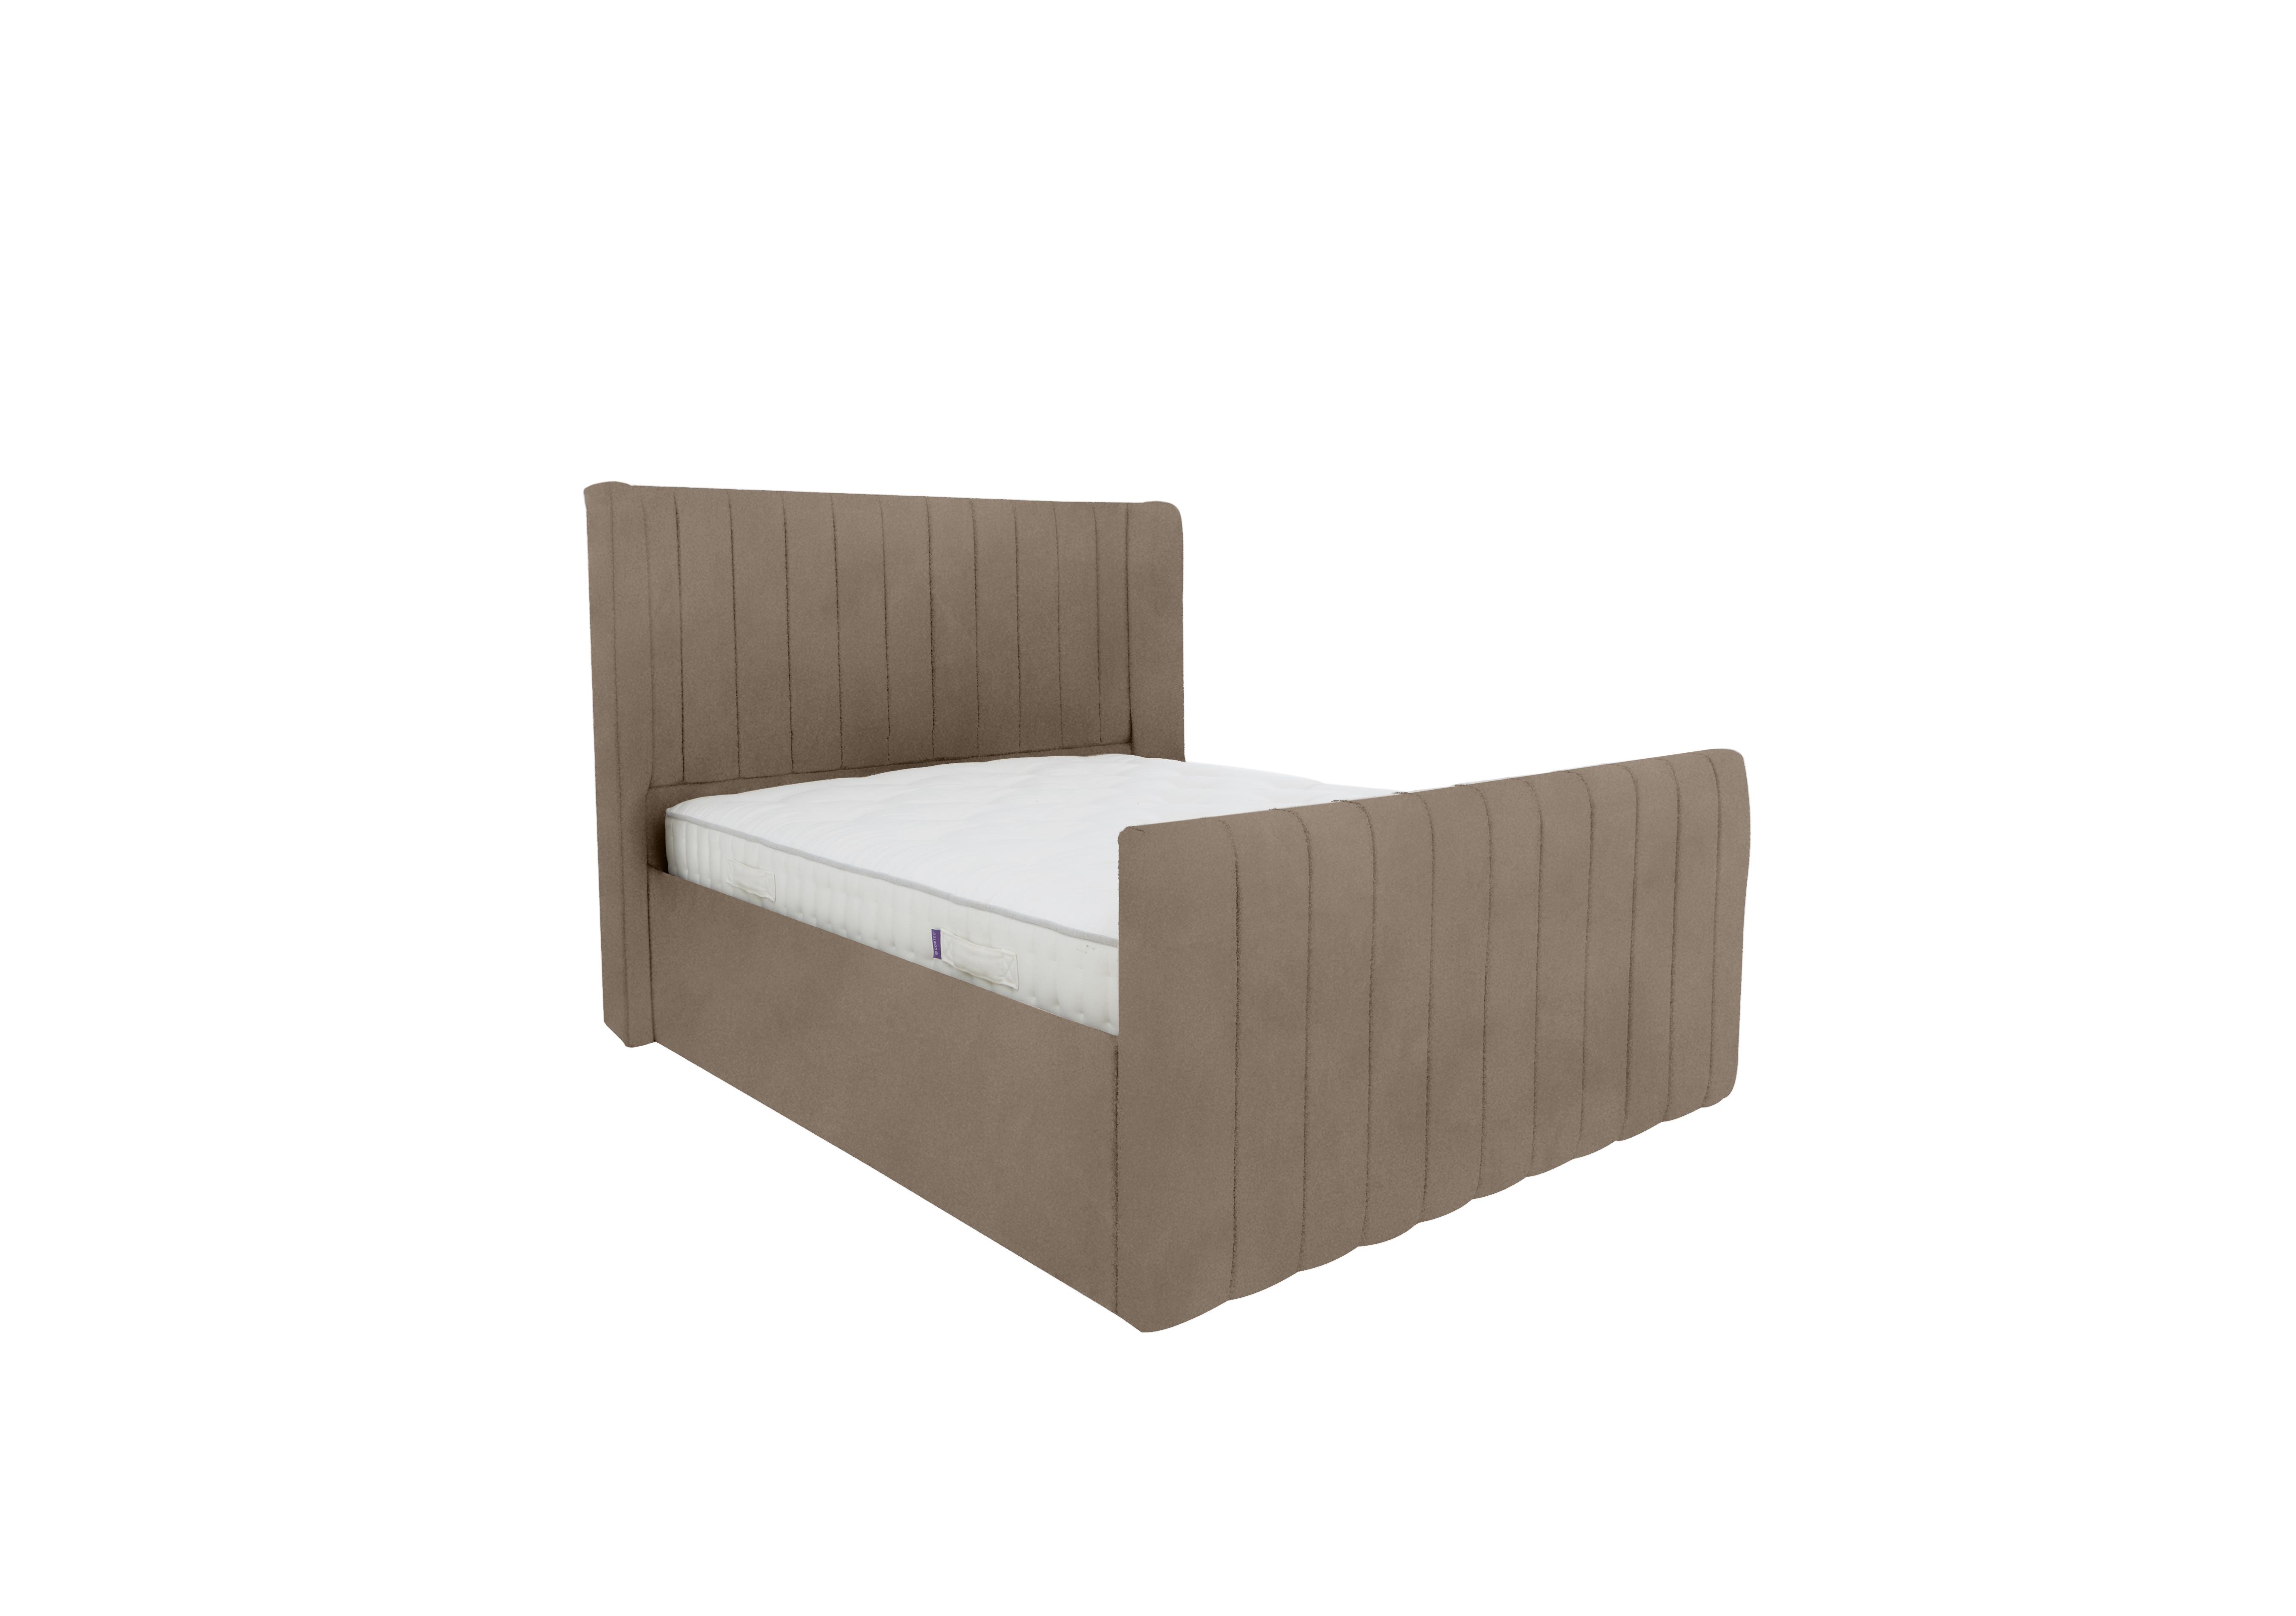 Eira High Foot End Bed Frame in Sanderson Potters Clay on Furniture Village